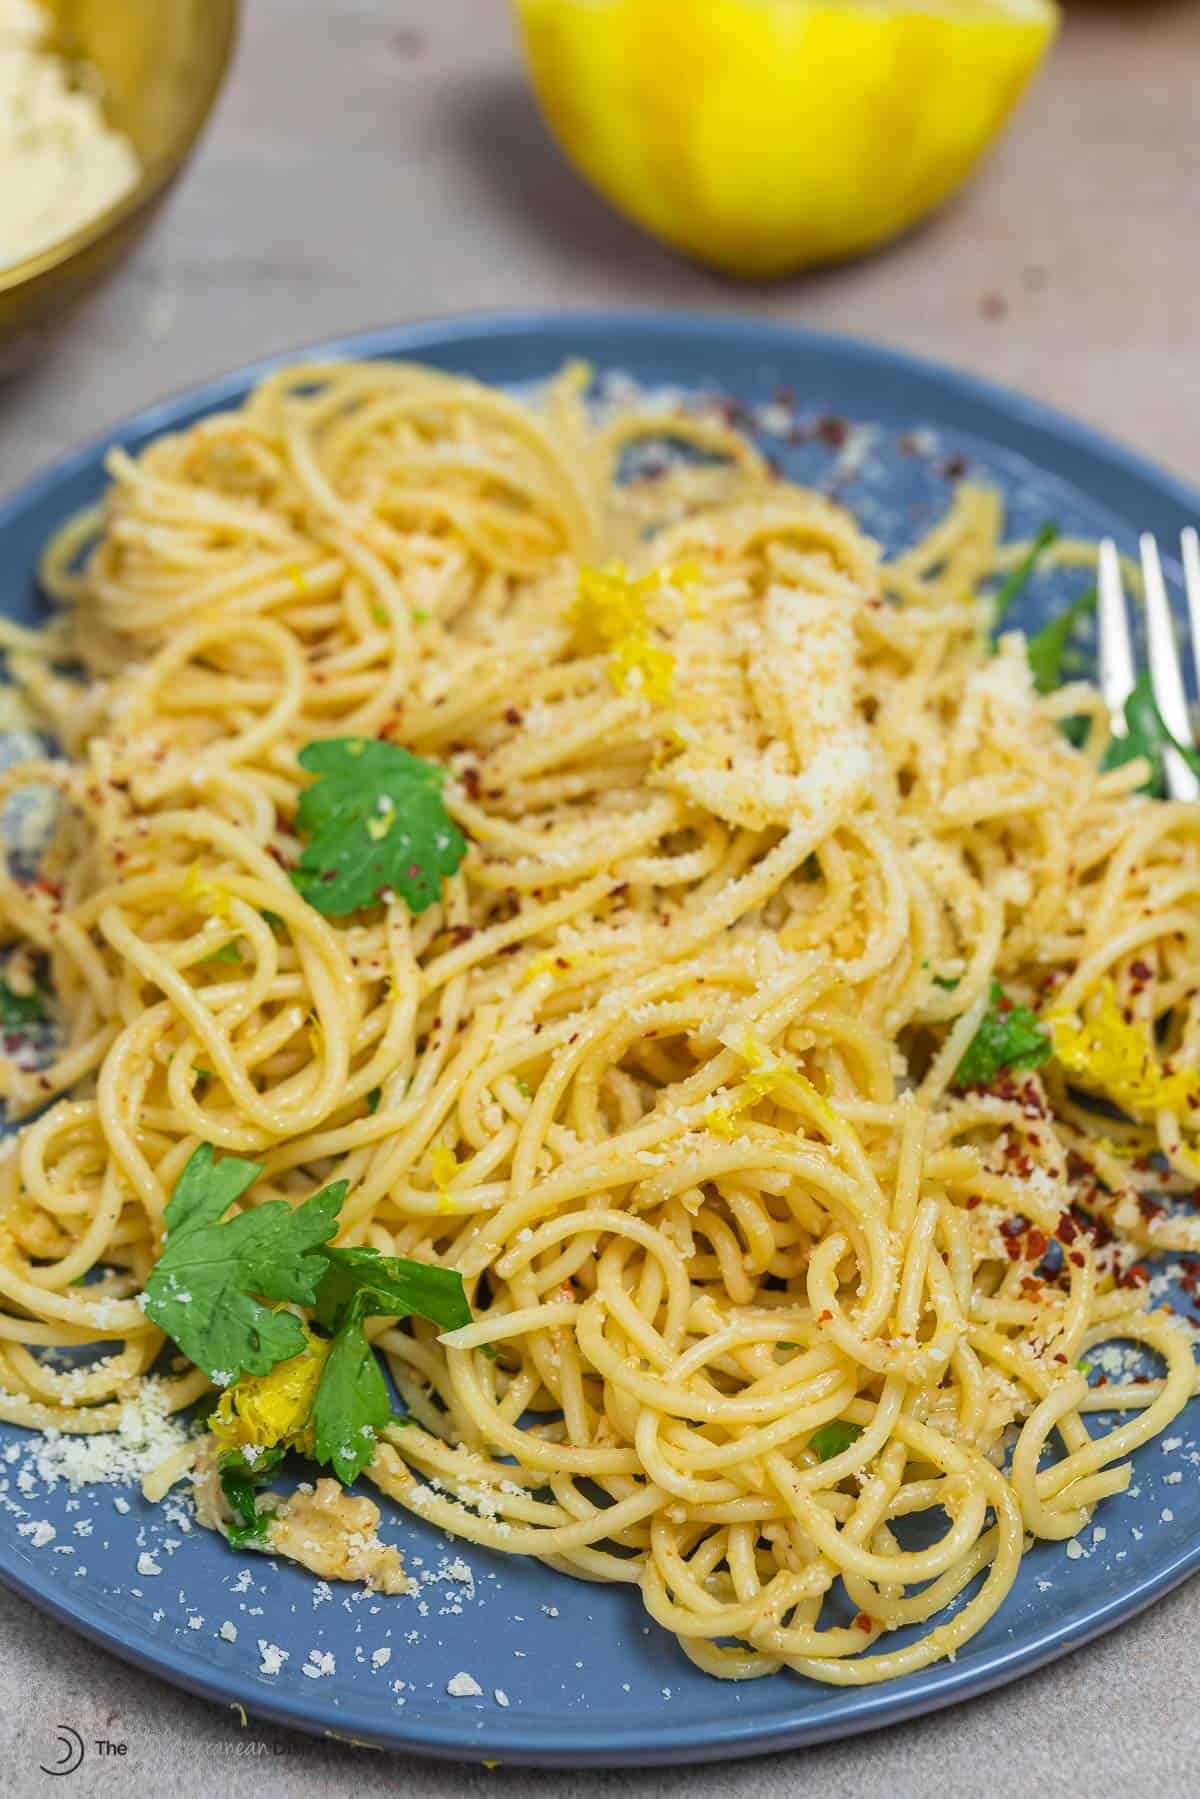 a lighter spaghetti al limone on a plate sprinkled with parmesan cheese and red pepper flakes.